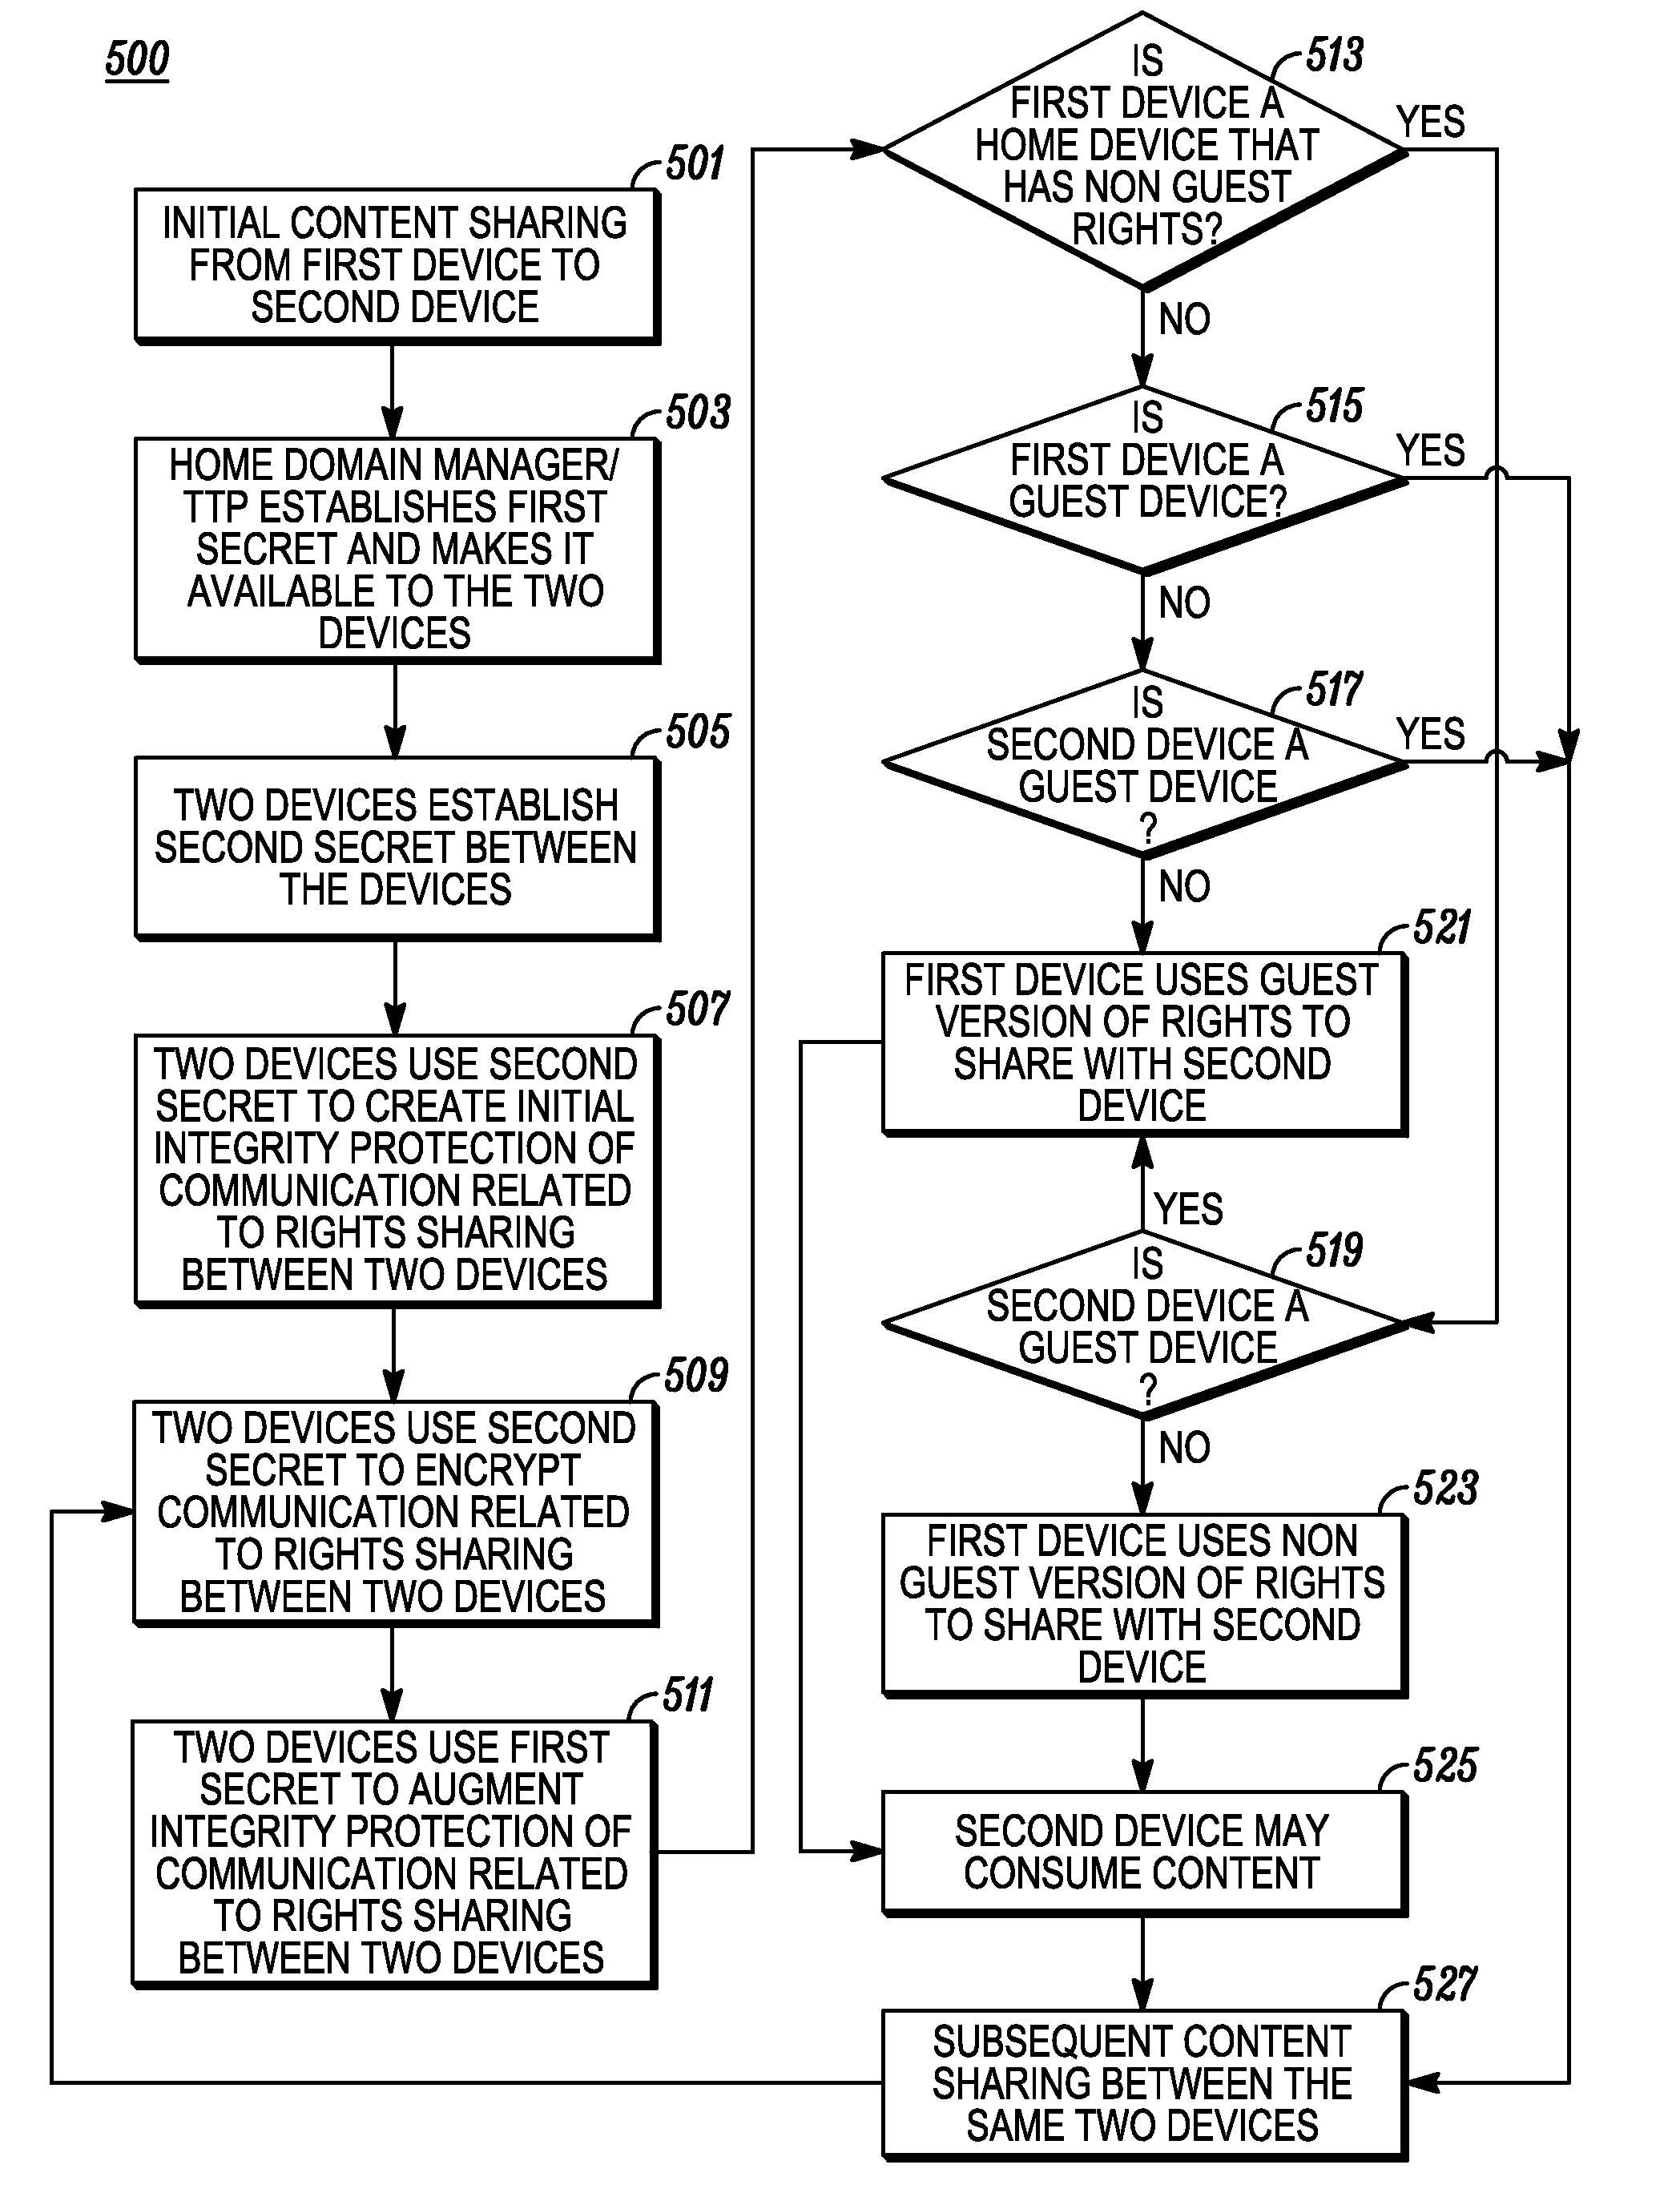 System and method to share a guest version of rights between devices